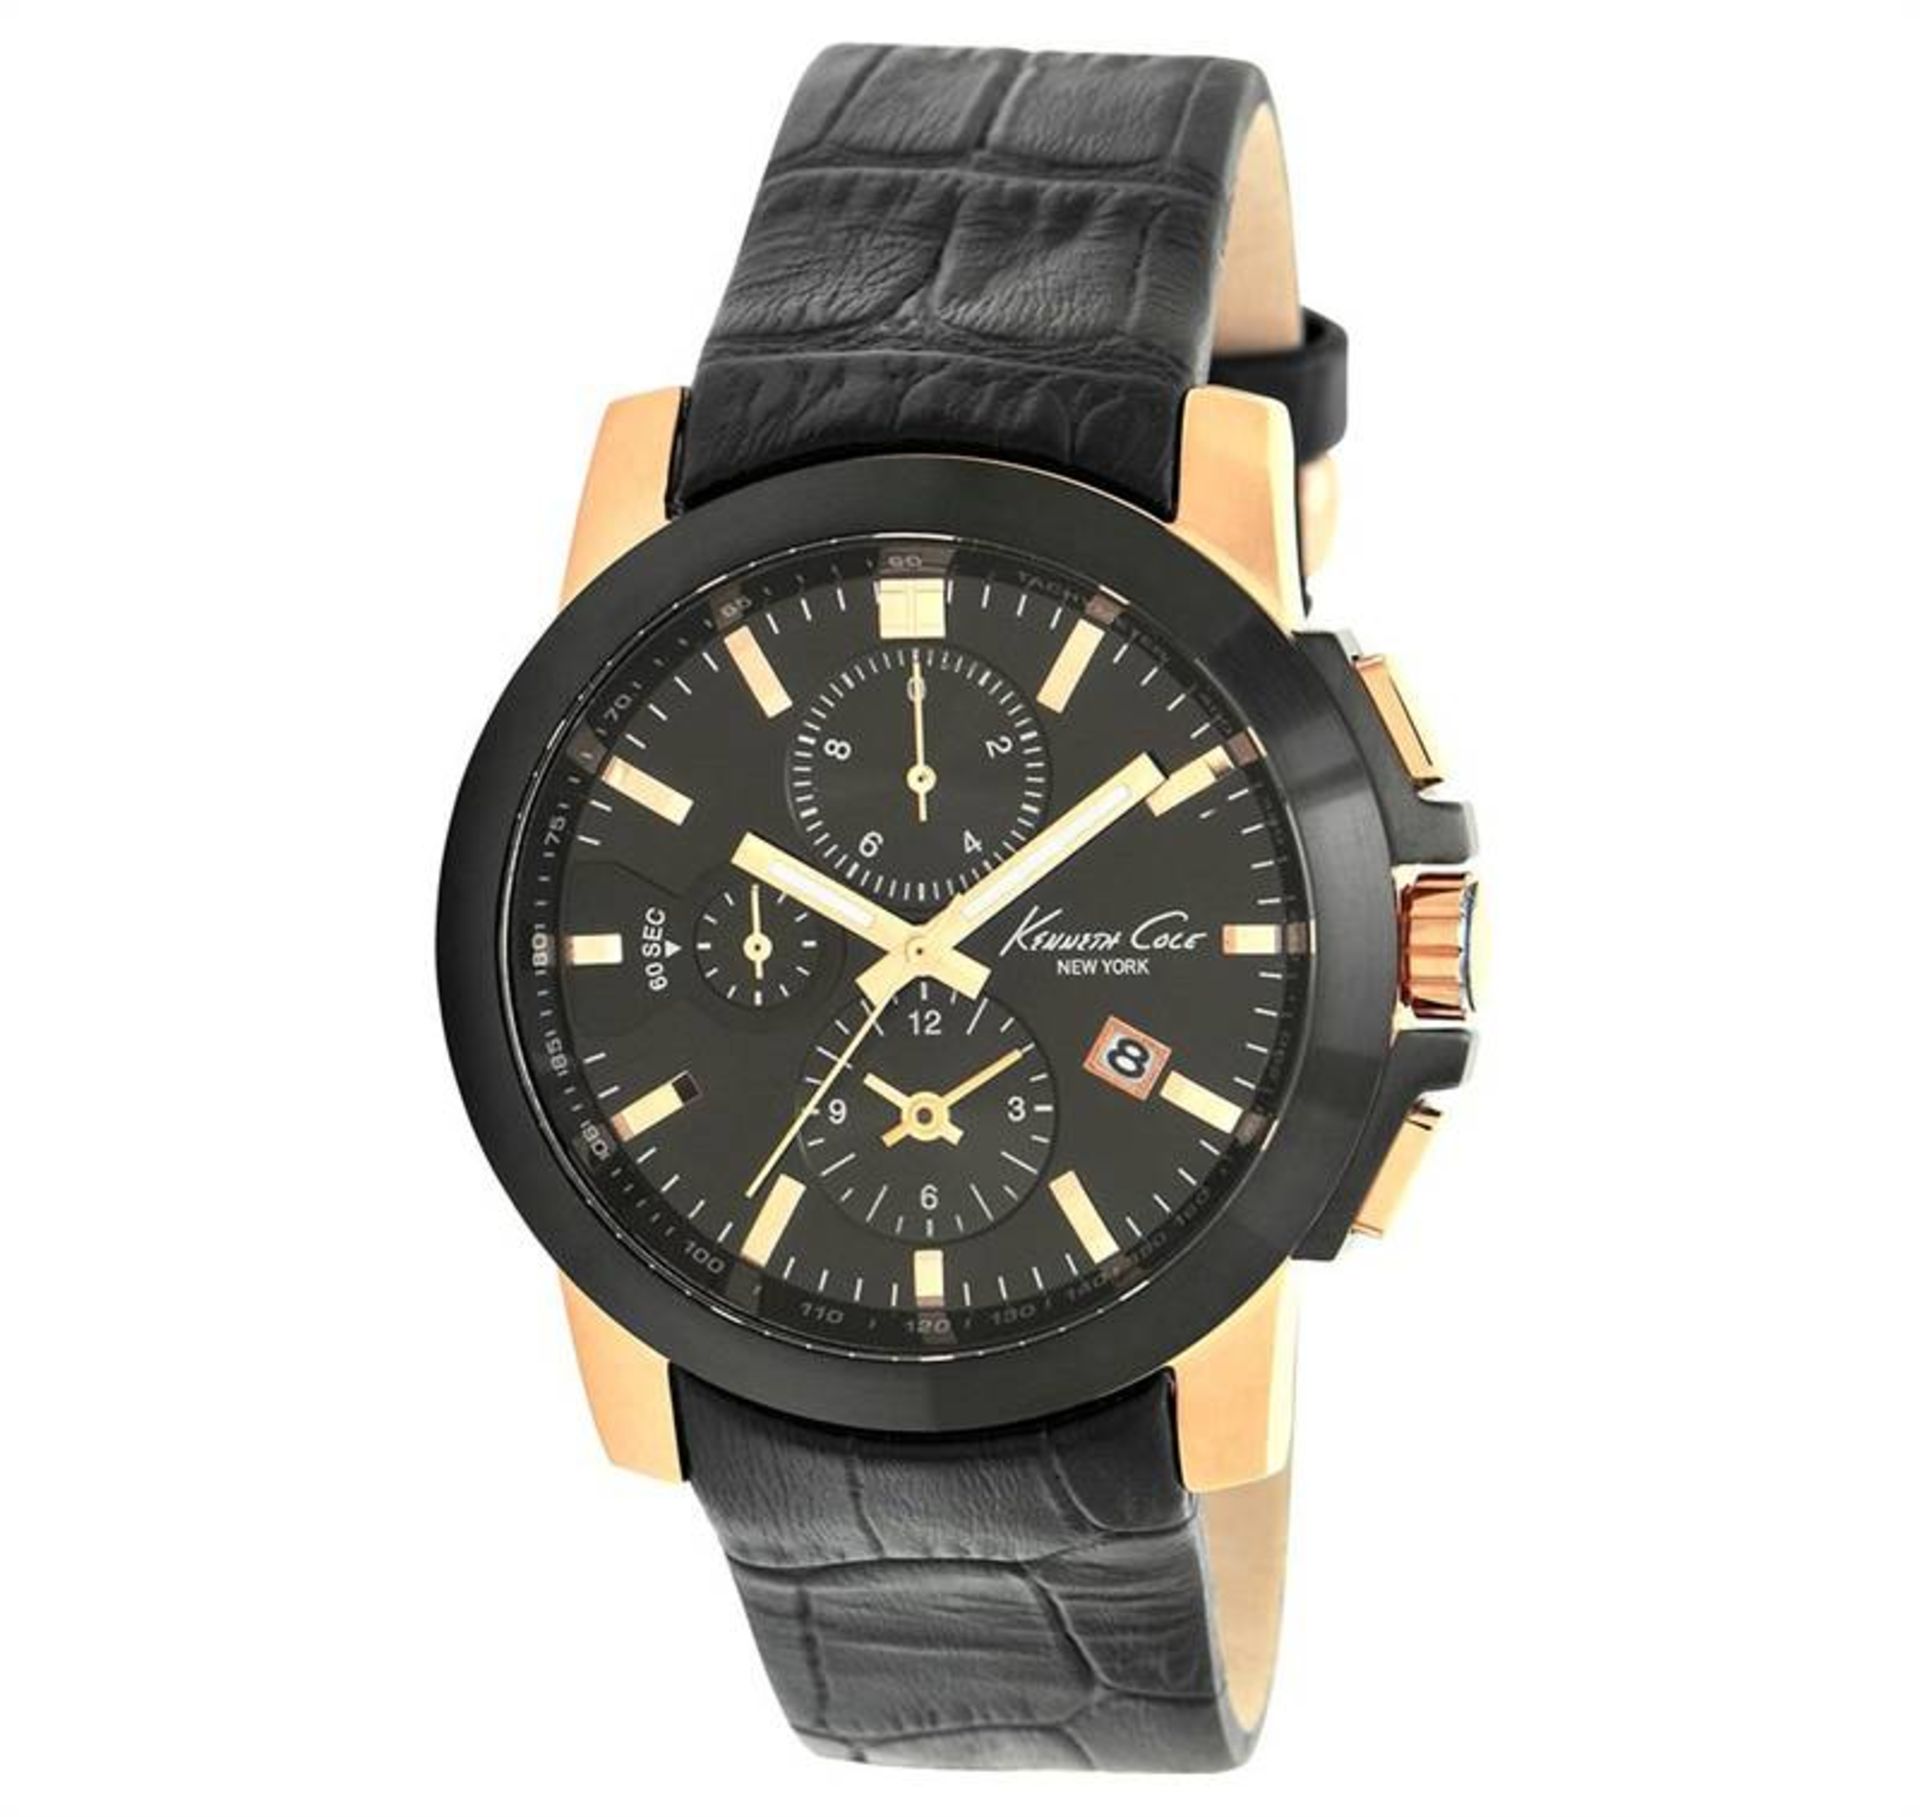 NEW & BOXED Kenneth Cole New York Men's KC1816 Watch. Sporty chronograph features in a package